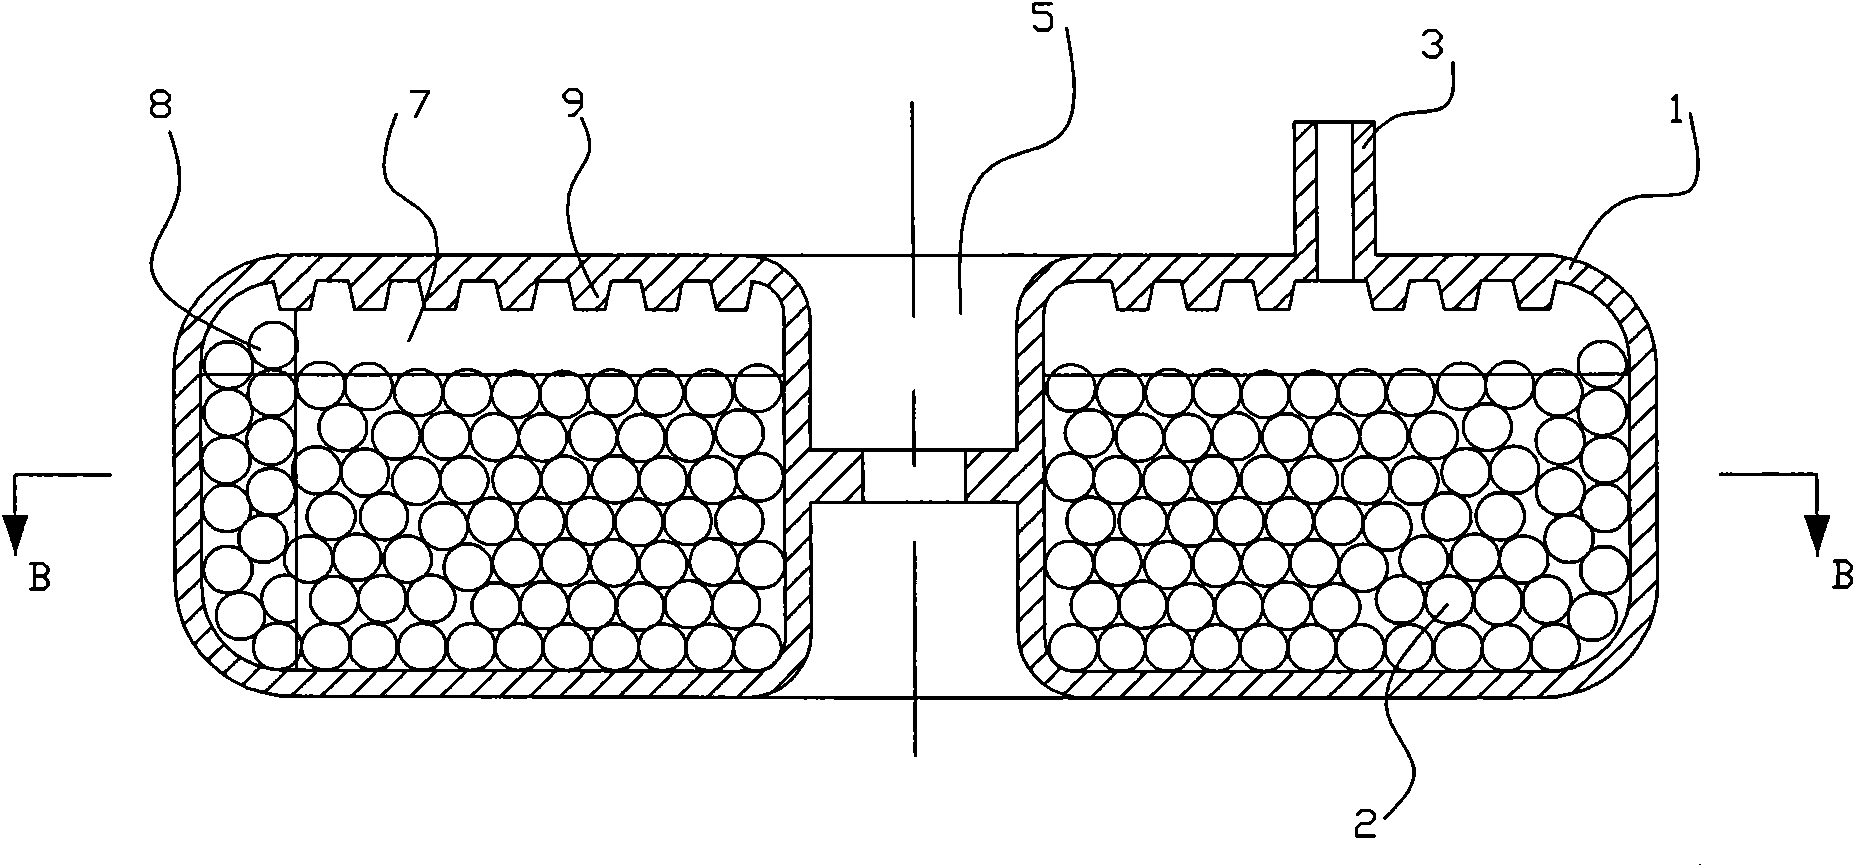 Oxygen humidifying and conveying device